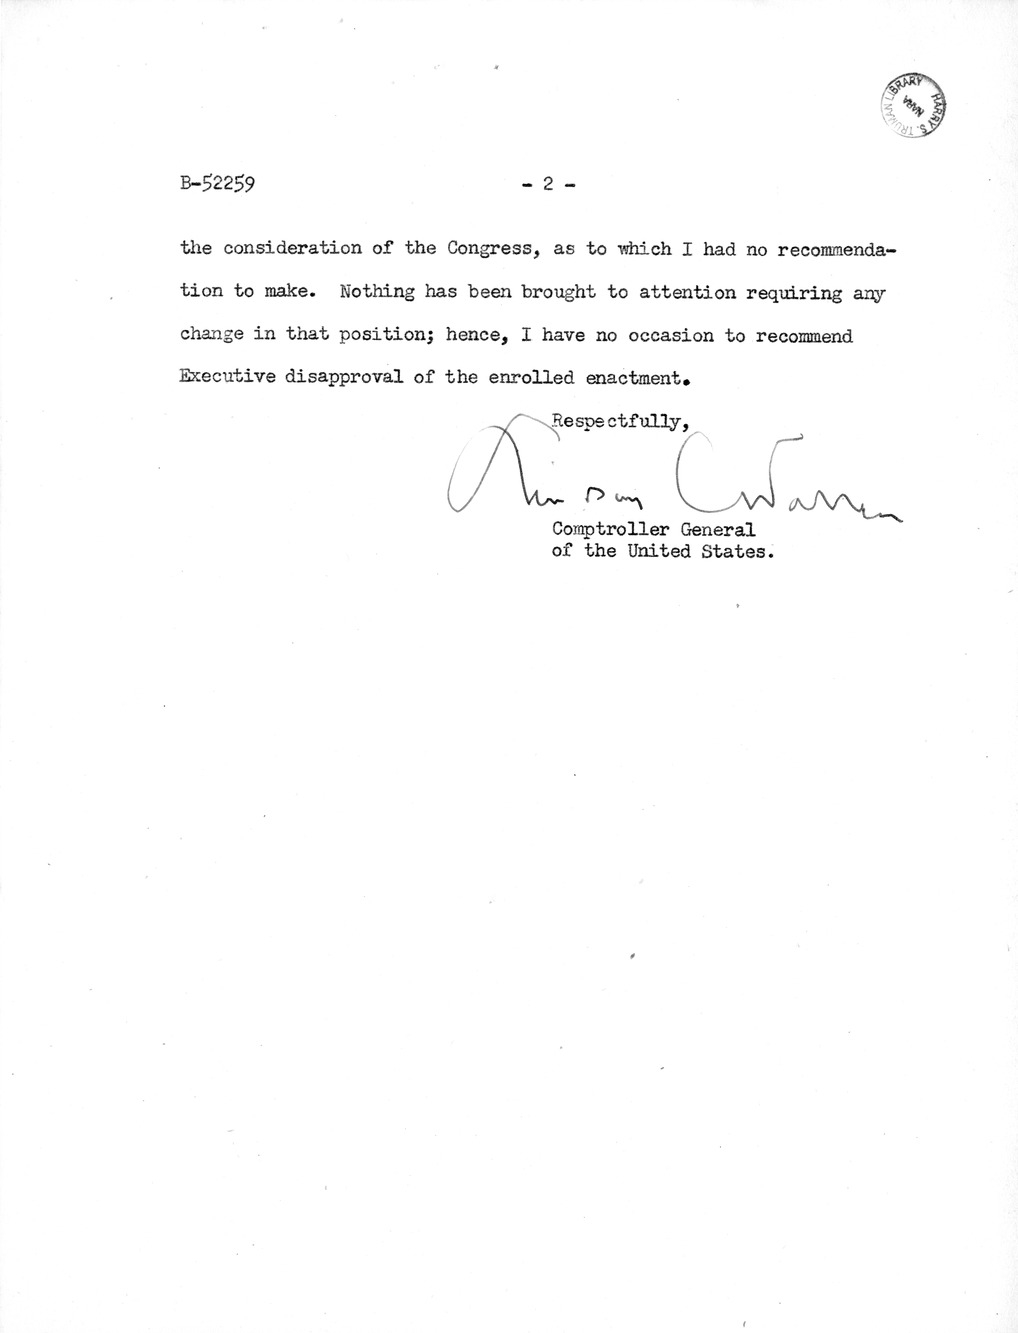 Memorandum from Frederick J. Bailey to M. C. Latta, H. R. 4884, To Relieve Certain Employees of the Veterans' Administration From Financial Liability for Certain Overpayments and Allow Such Credit Therefore as is Necessary in the Accounts of Guy F. Allen, Chief Disbursing Officer, with Attachments